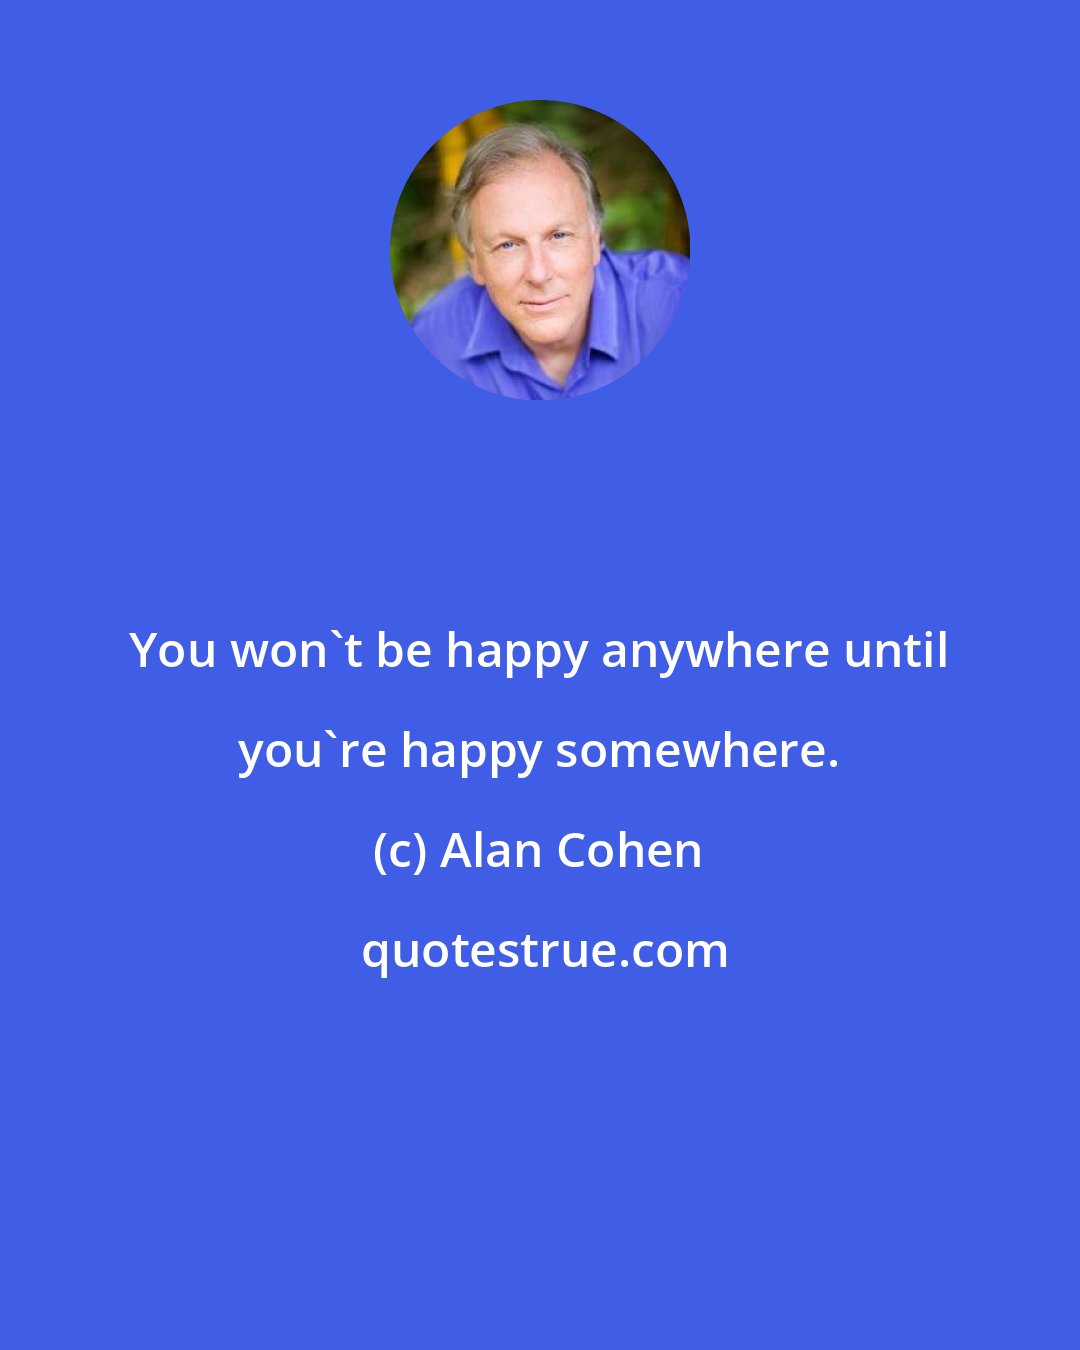 Alan Cohen: You won't be happy anywhere until you're happy somewhere.